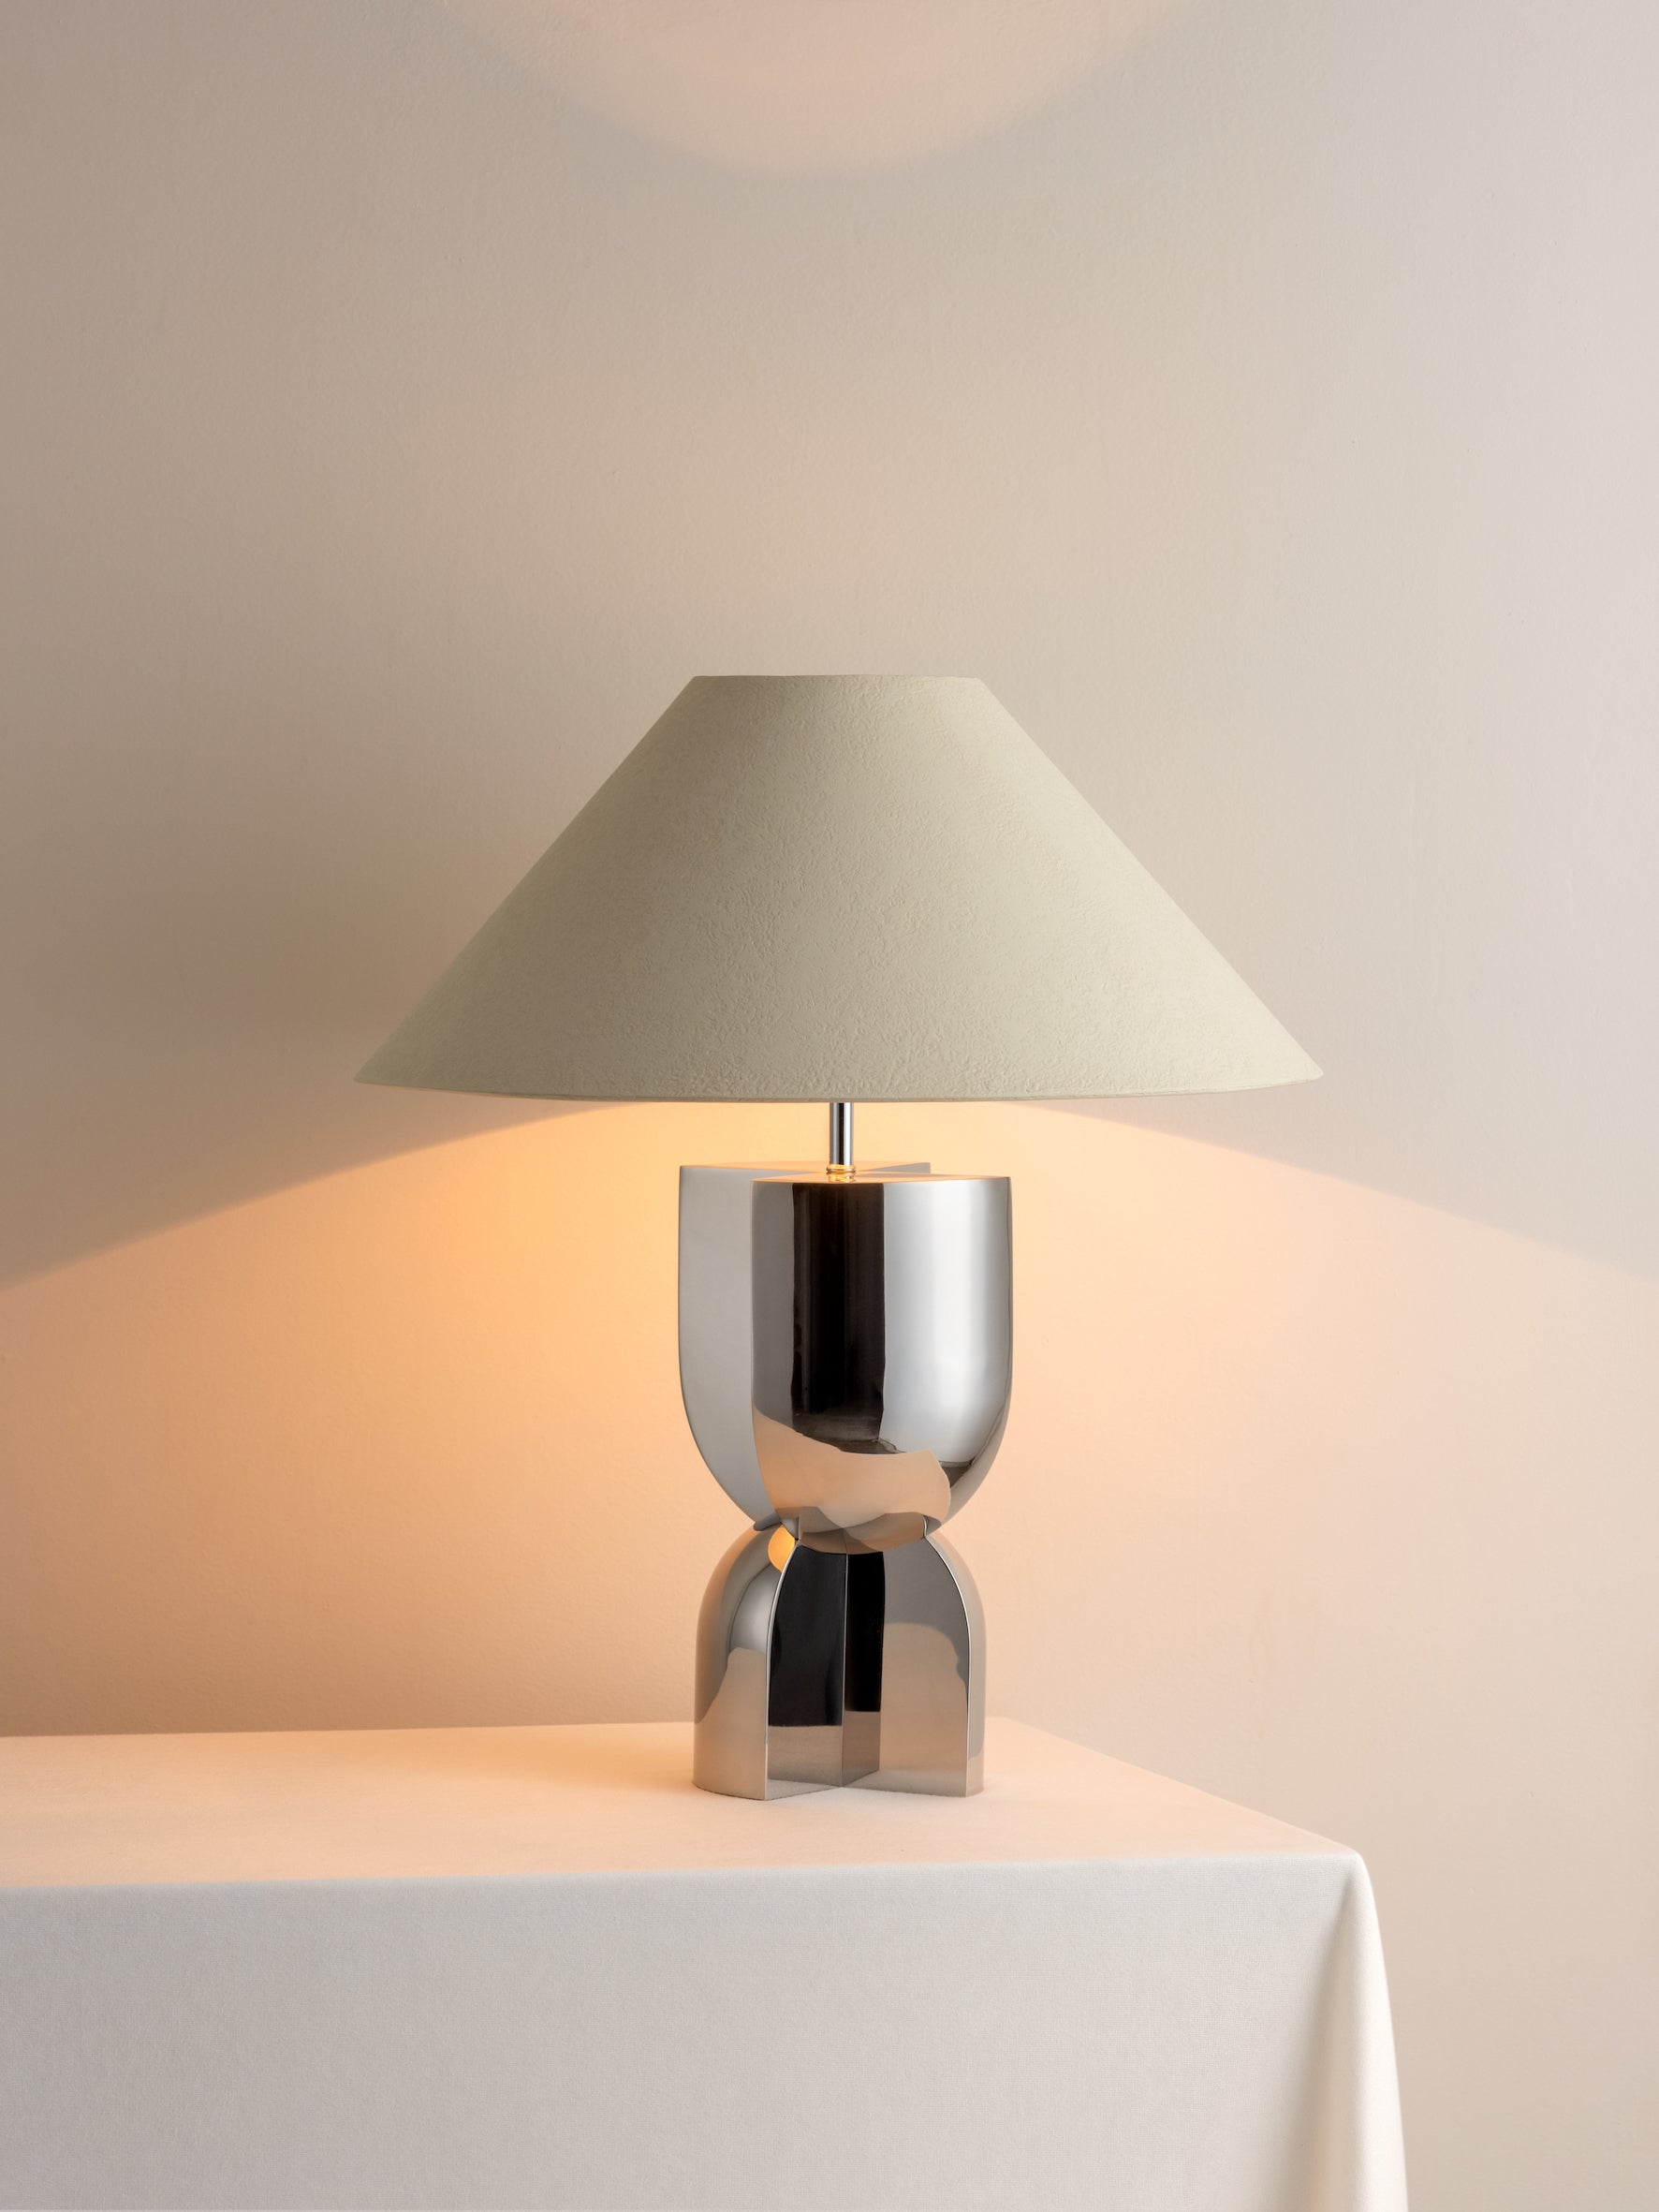 Editions chrome lamp with + plaster shade | Table Lamp | Lights & Lamps | UK | Modern Affordable Designer Lighting